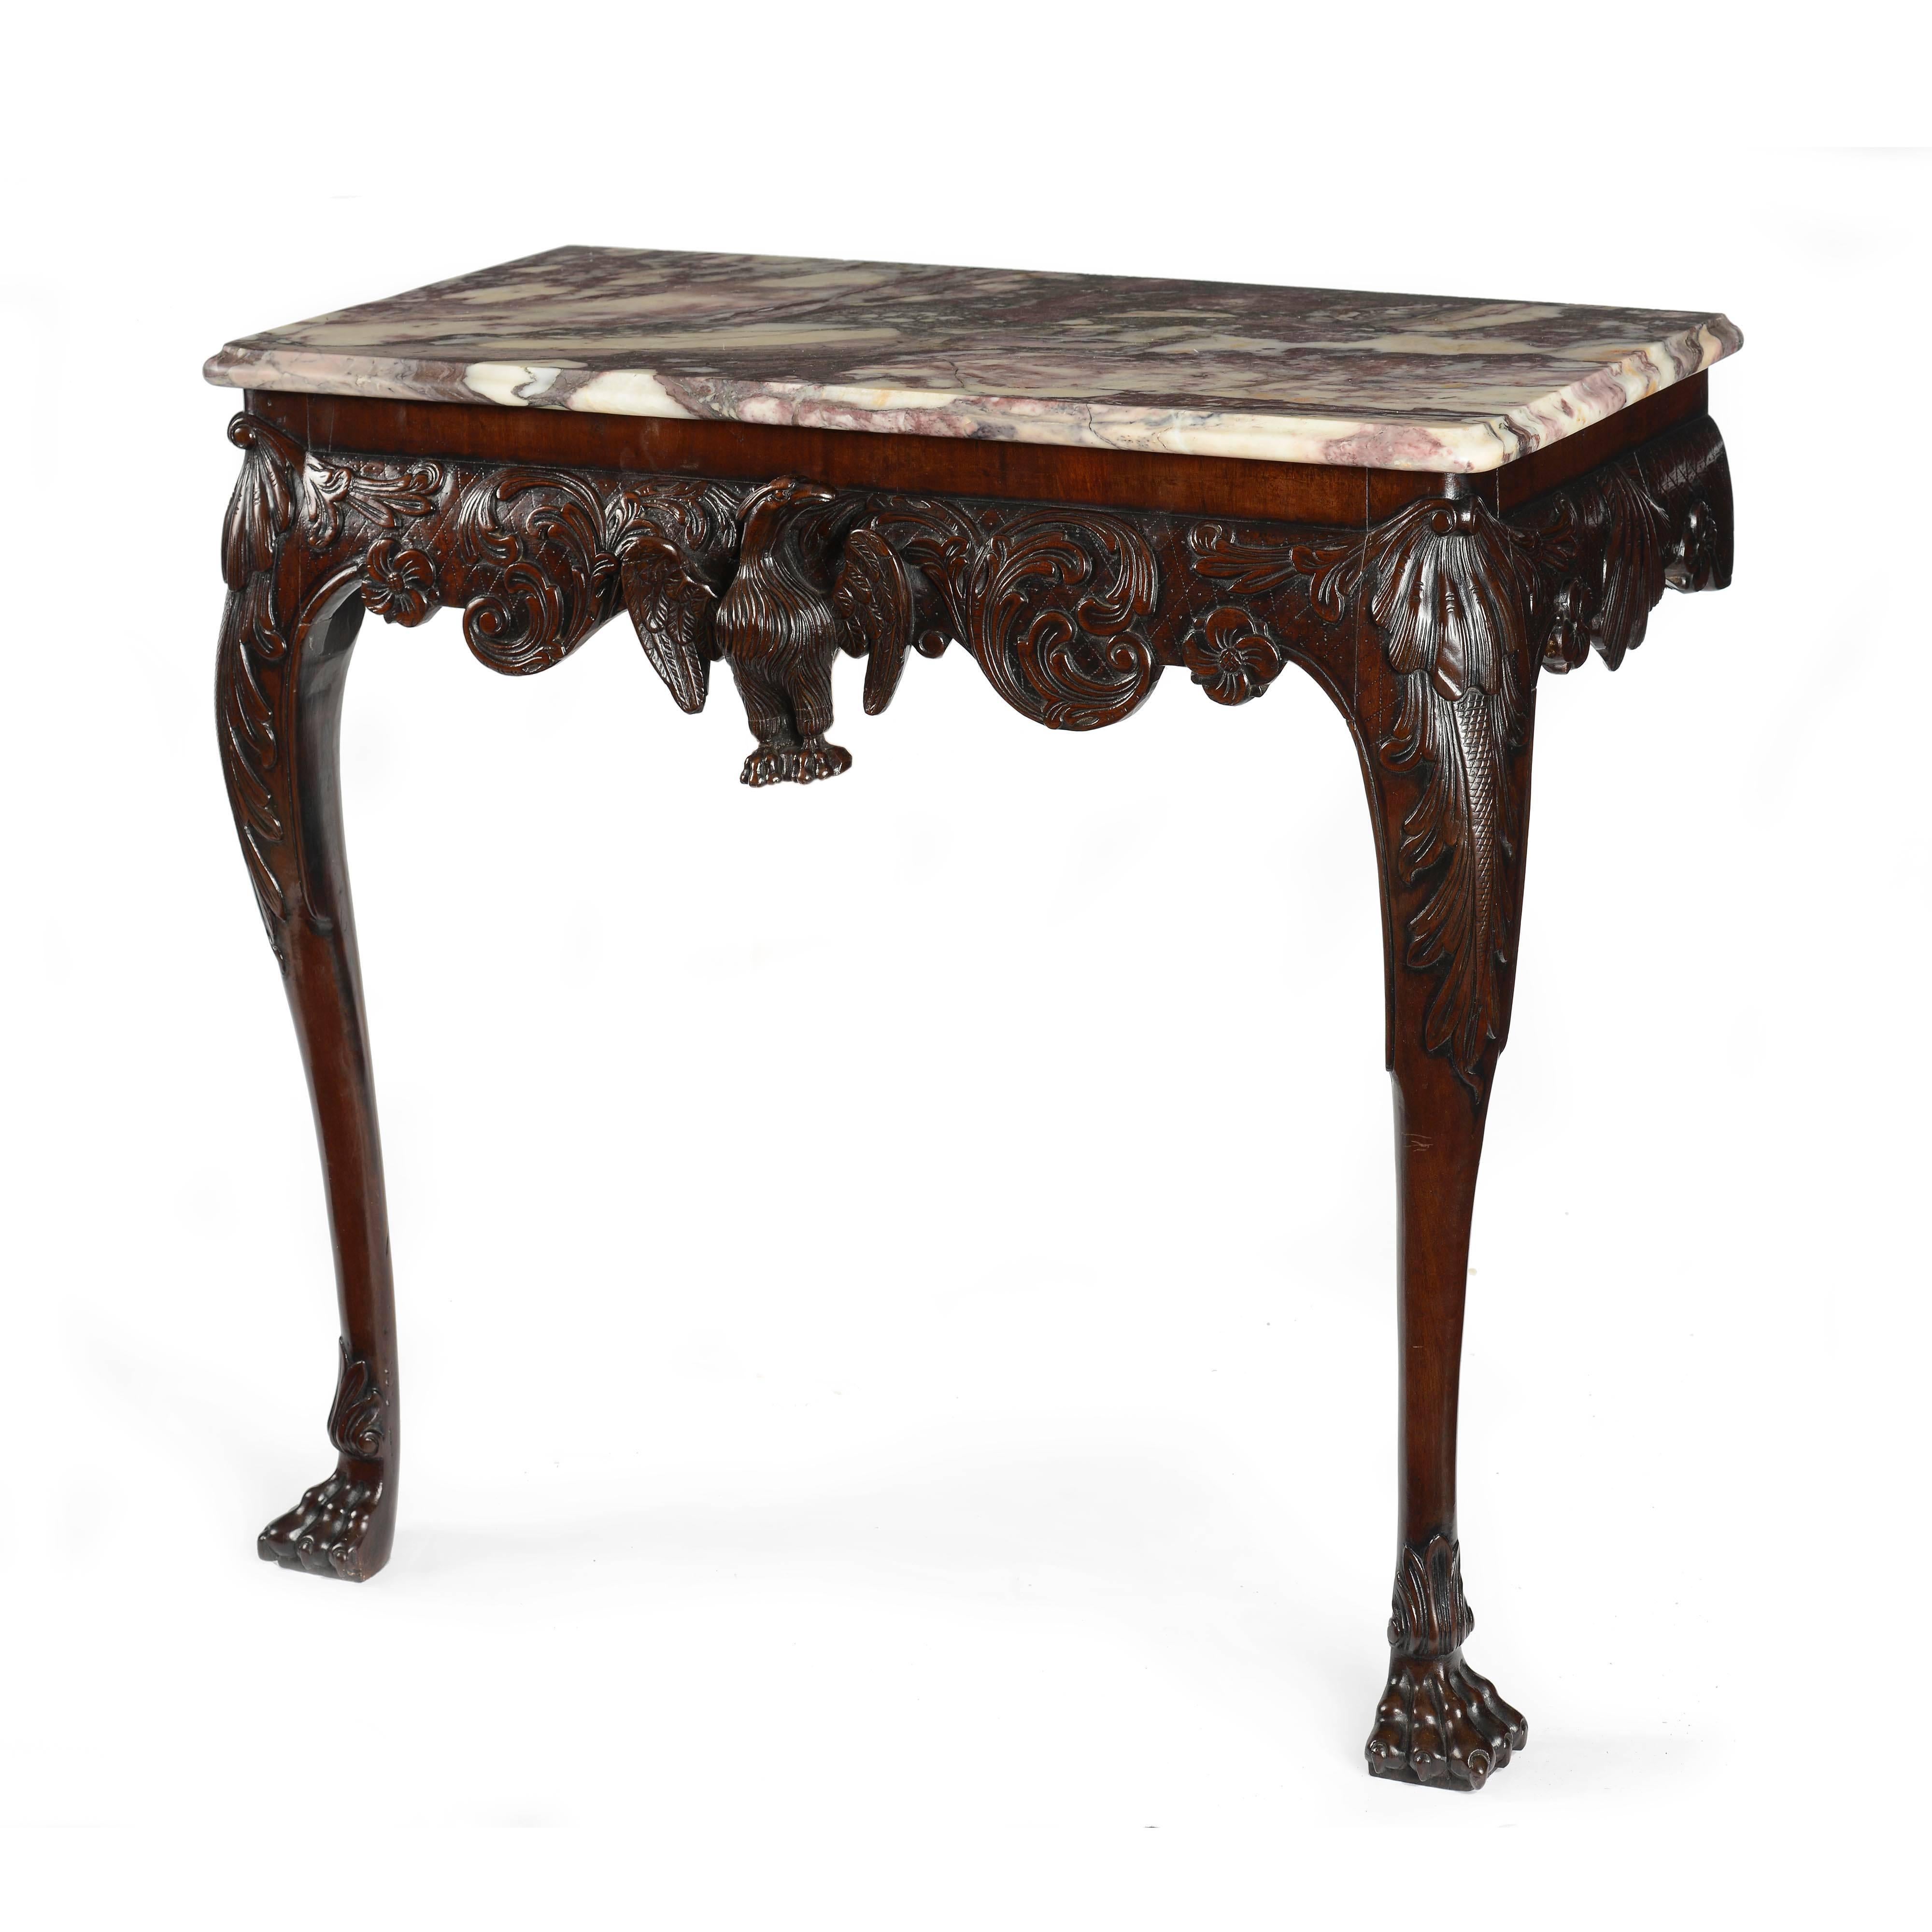 A superb Irish George II carved Cuban mahogany console table, with crisply carved detailing and excellent color and patina throughout. The breche Violette moulded marble top of rectangular form with moulded edge, below a central carved spread eagle